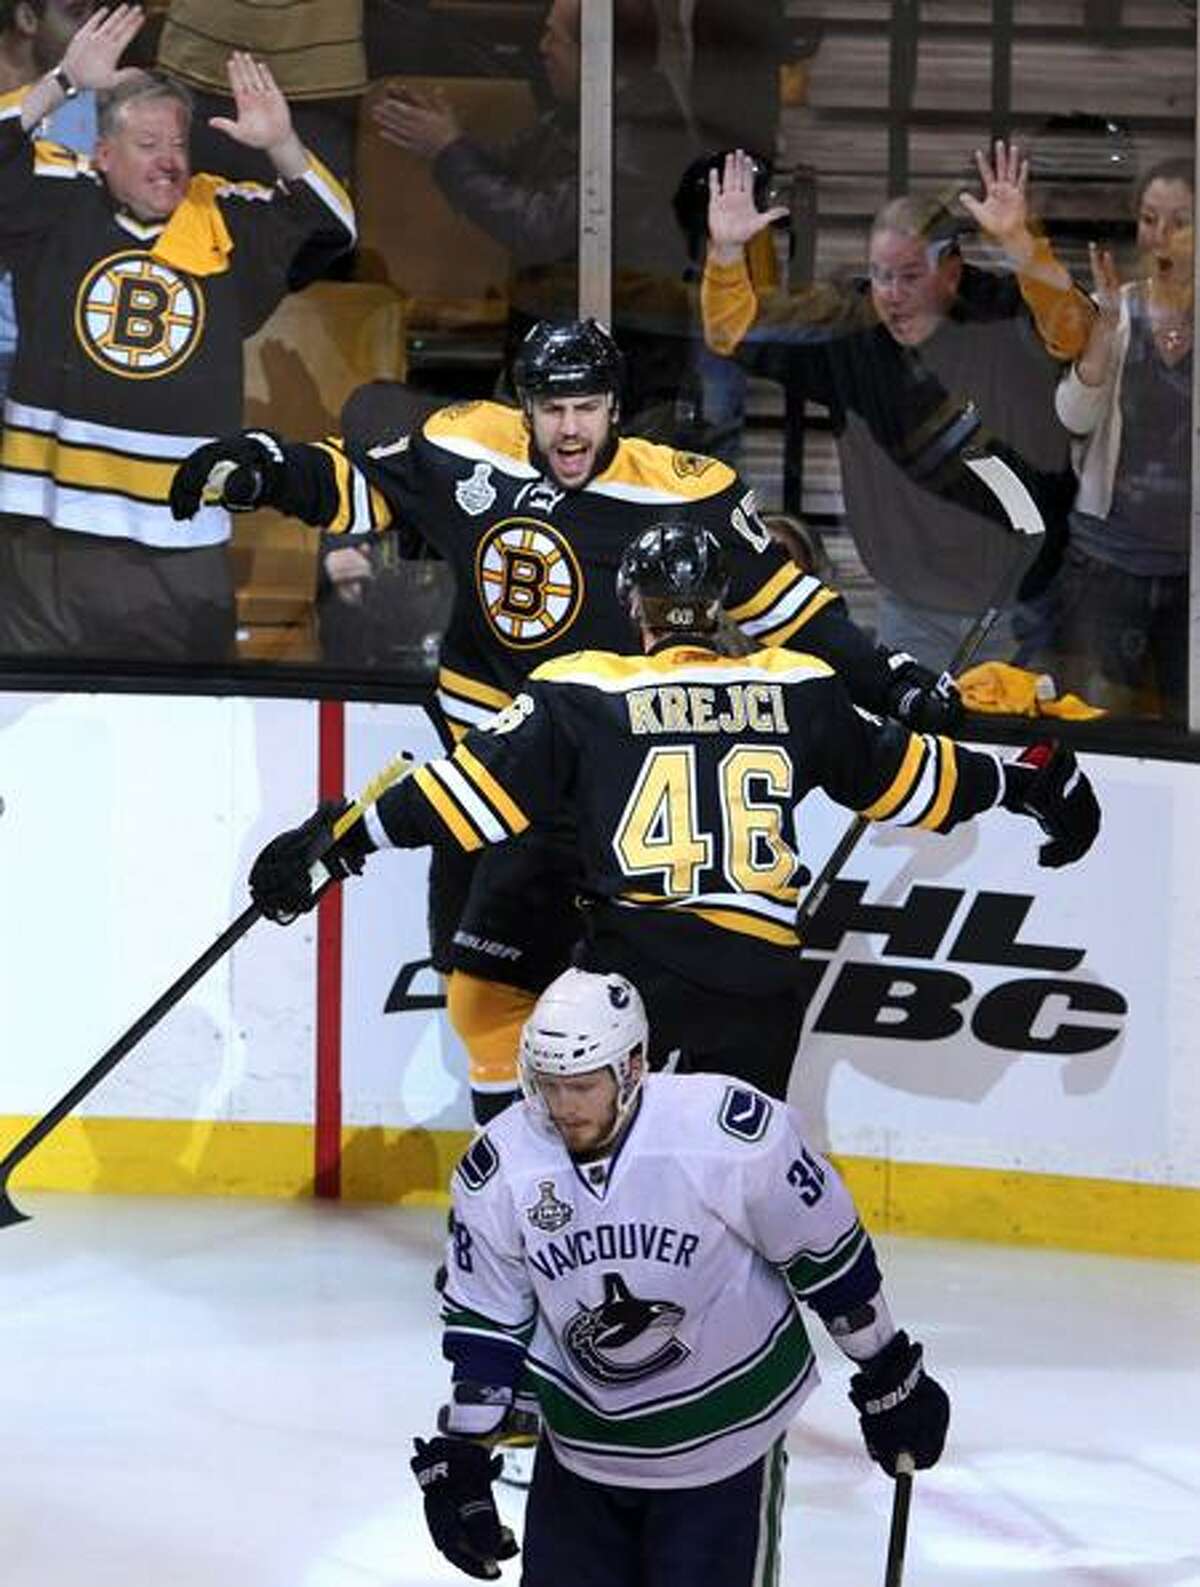 Stanley Cup Final: Bruins' Brad Marchand, David Krejci to play in Game 1 